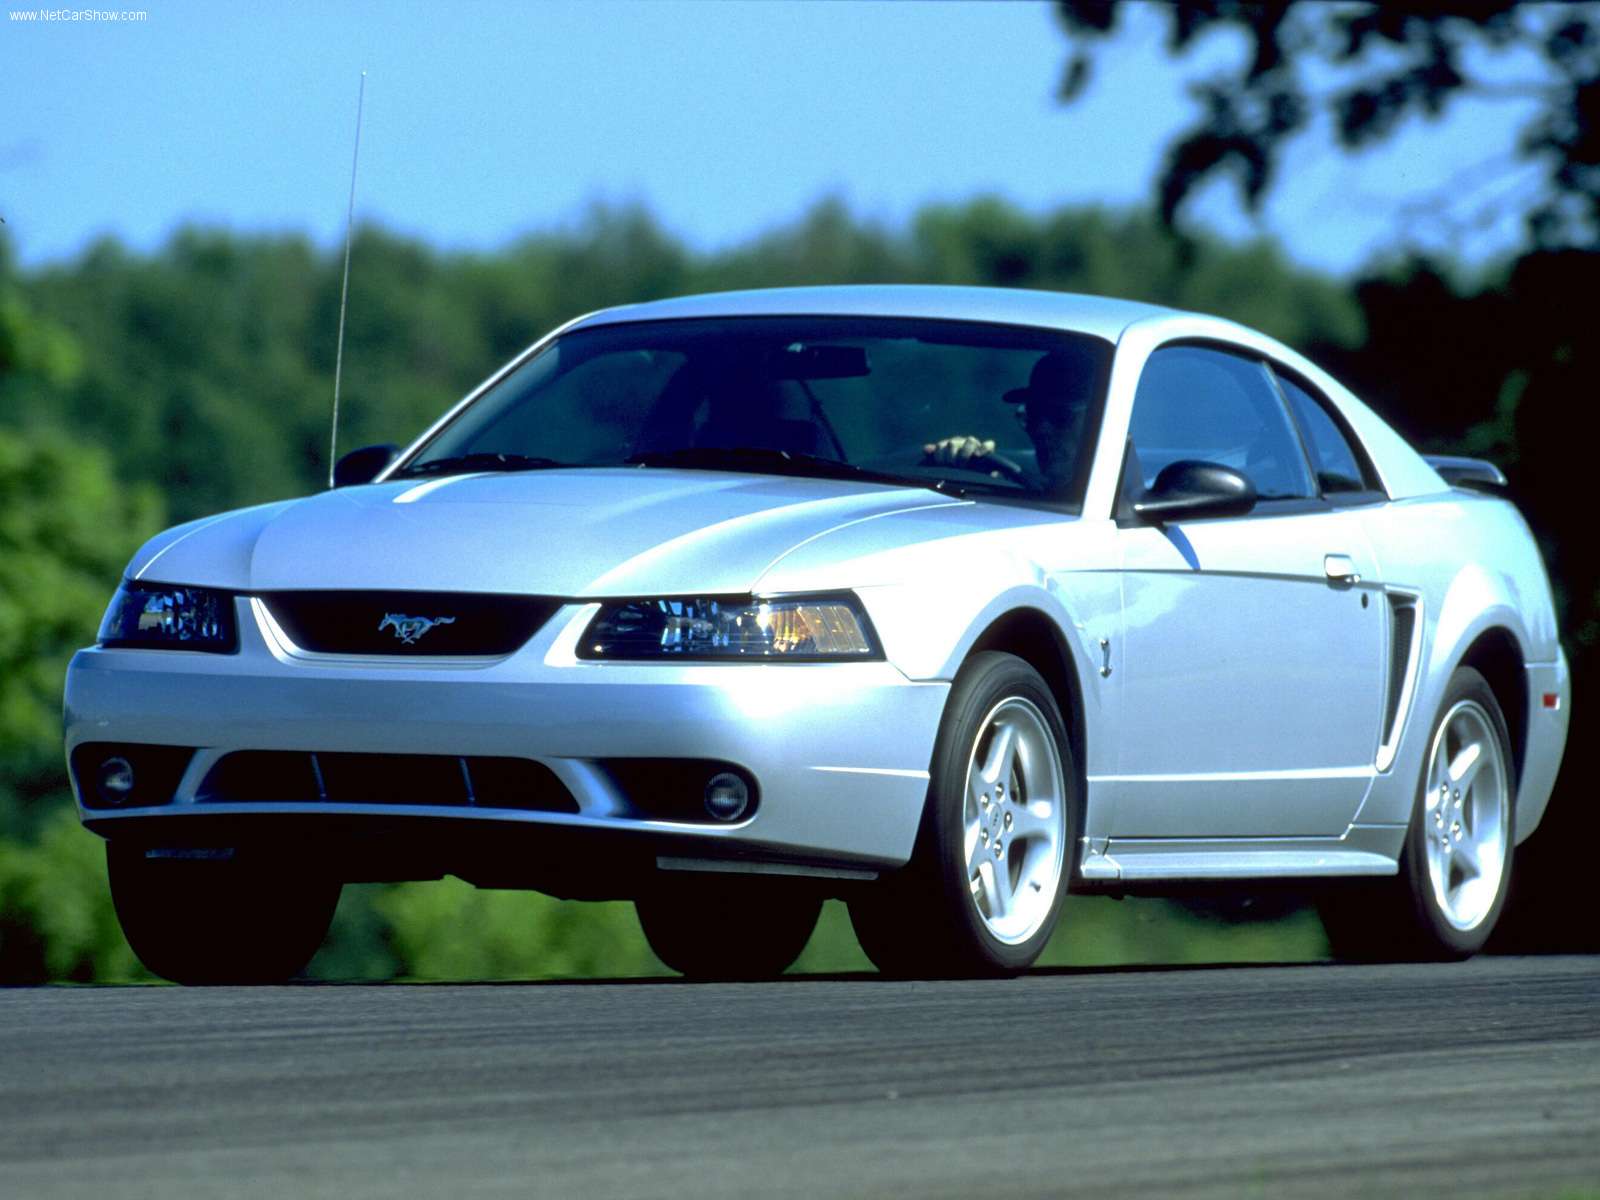 Wallpaper Of Cool Mustang You Can Click Here To Find